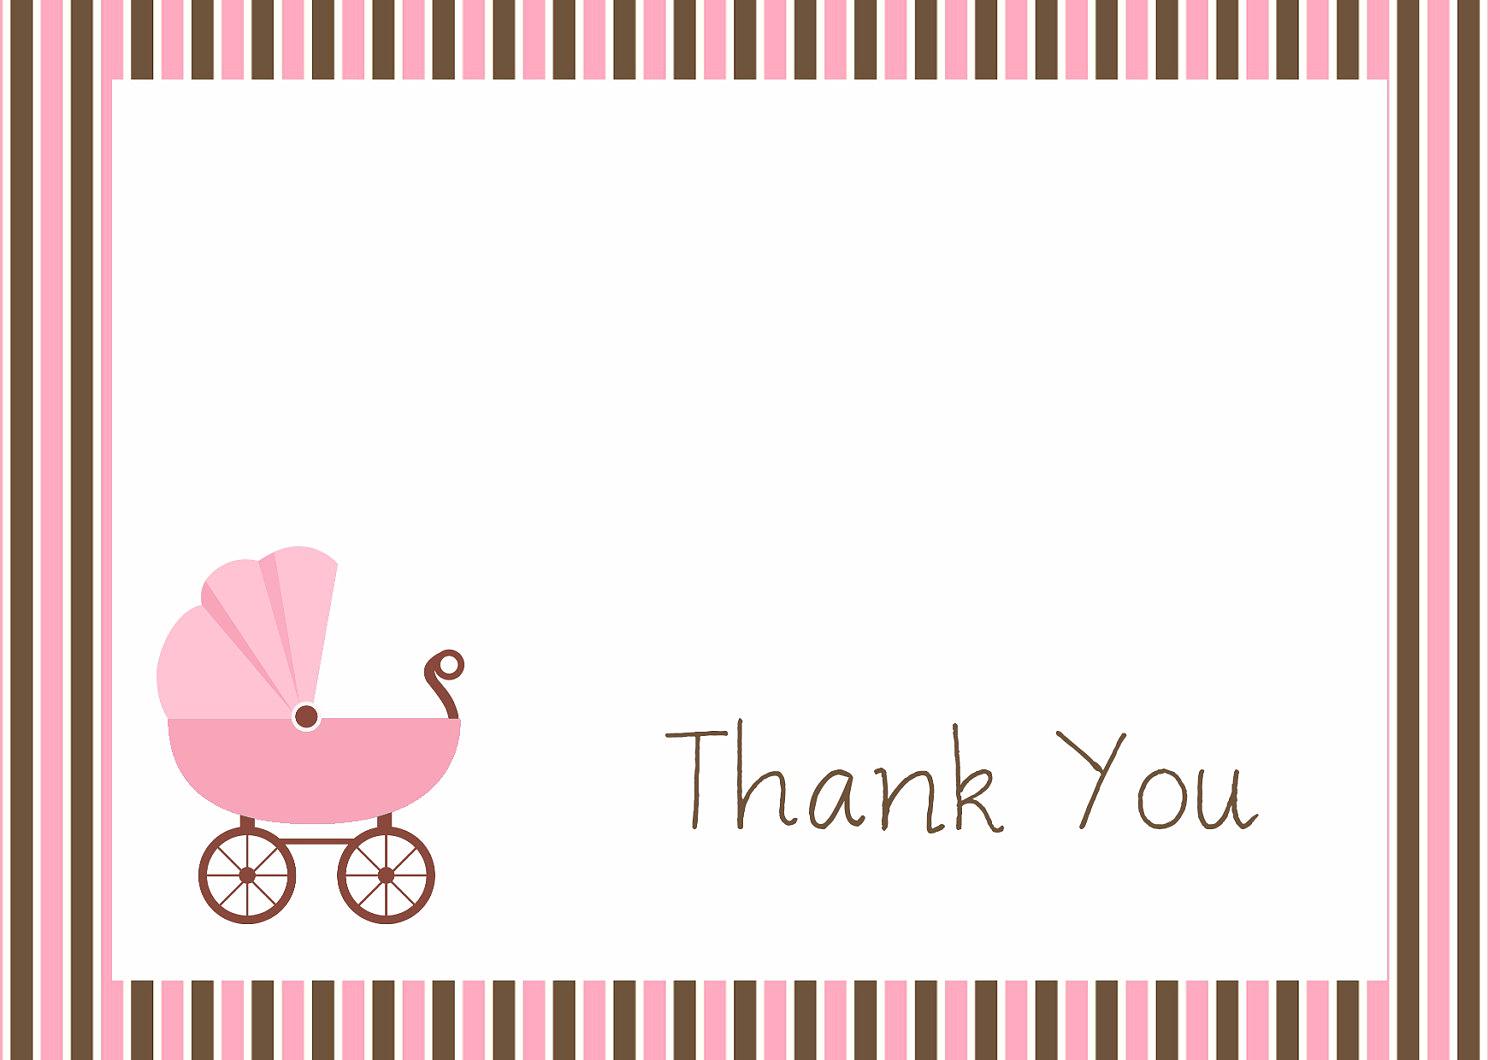 Full Size of Baby Shower:72+ Rousing Baby Shower Thank You Cards Picture Ideas Baby Shower Thank You Cards Juegos Para Baby Shower Baby Shower Cake Ideas Baby Shower Dessert Table Baby Shower Baskets Modern Baby Shower Thank You Card Ideas For Baby Shower Ndash Mykiddyclub